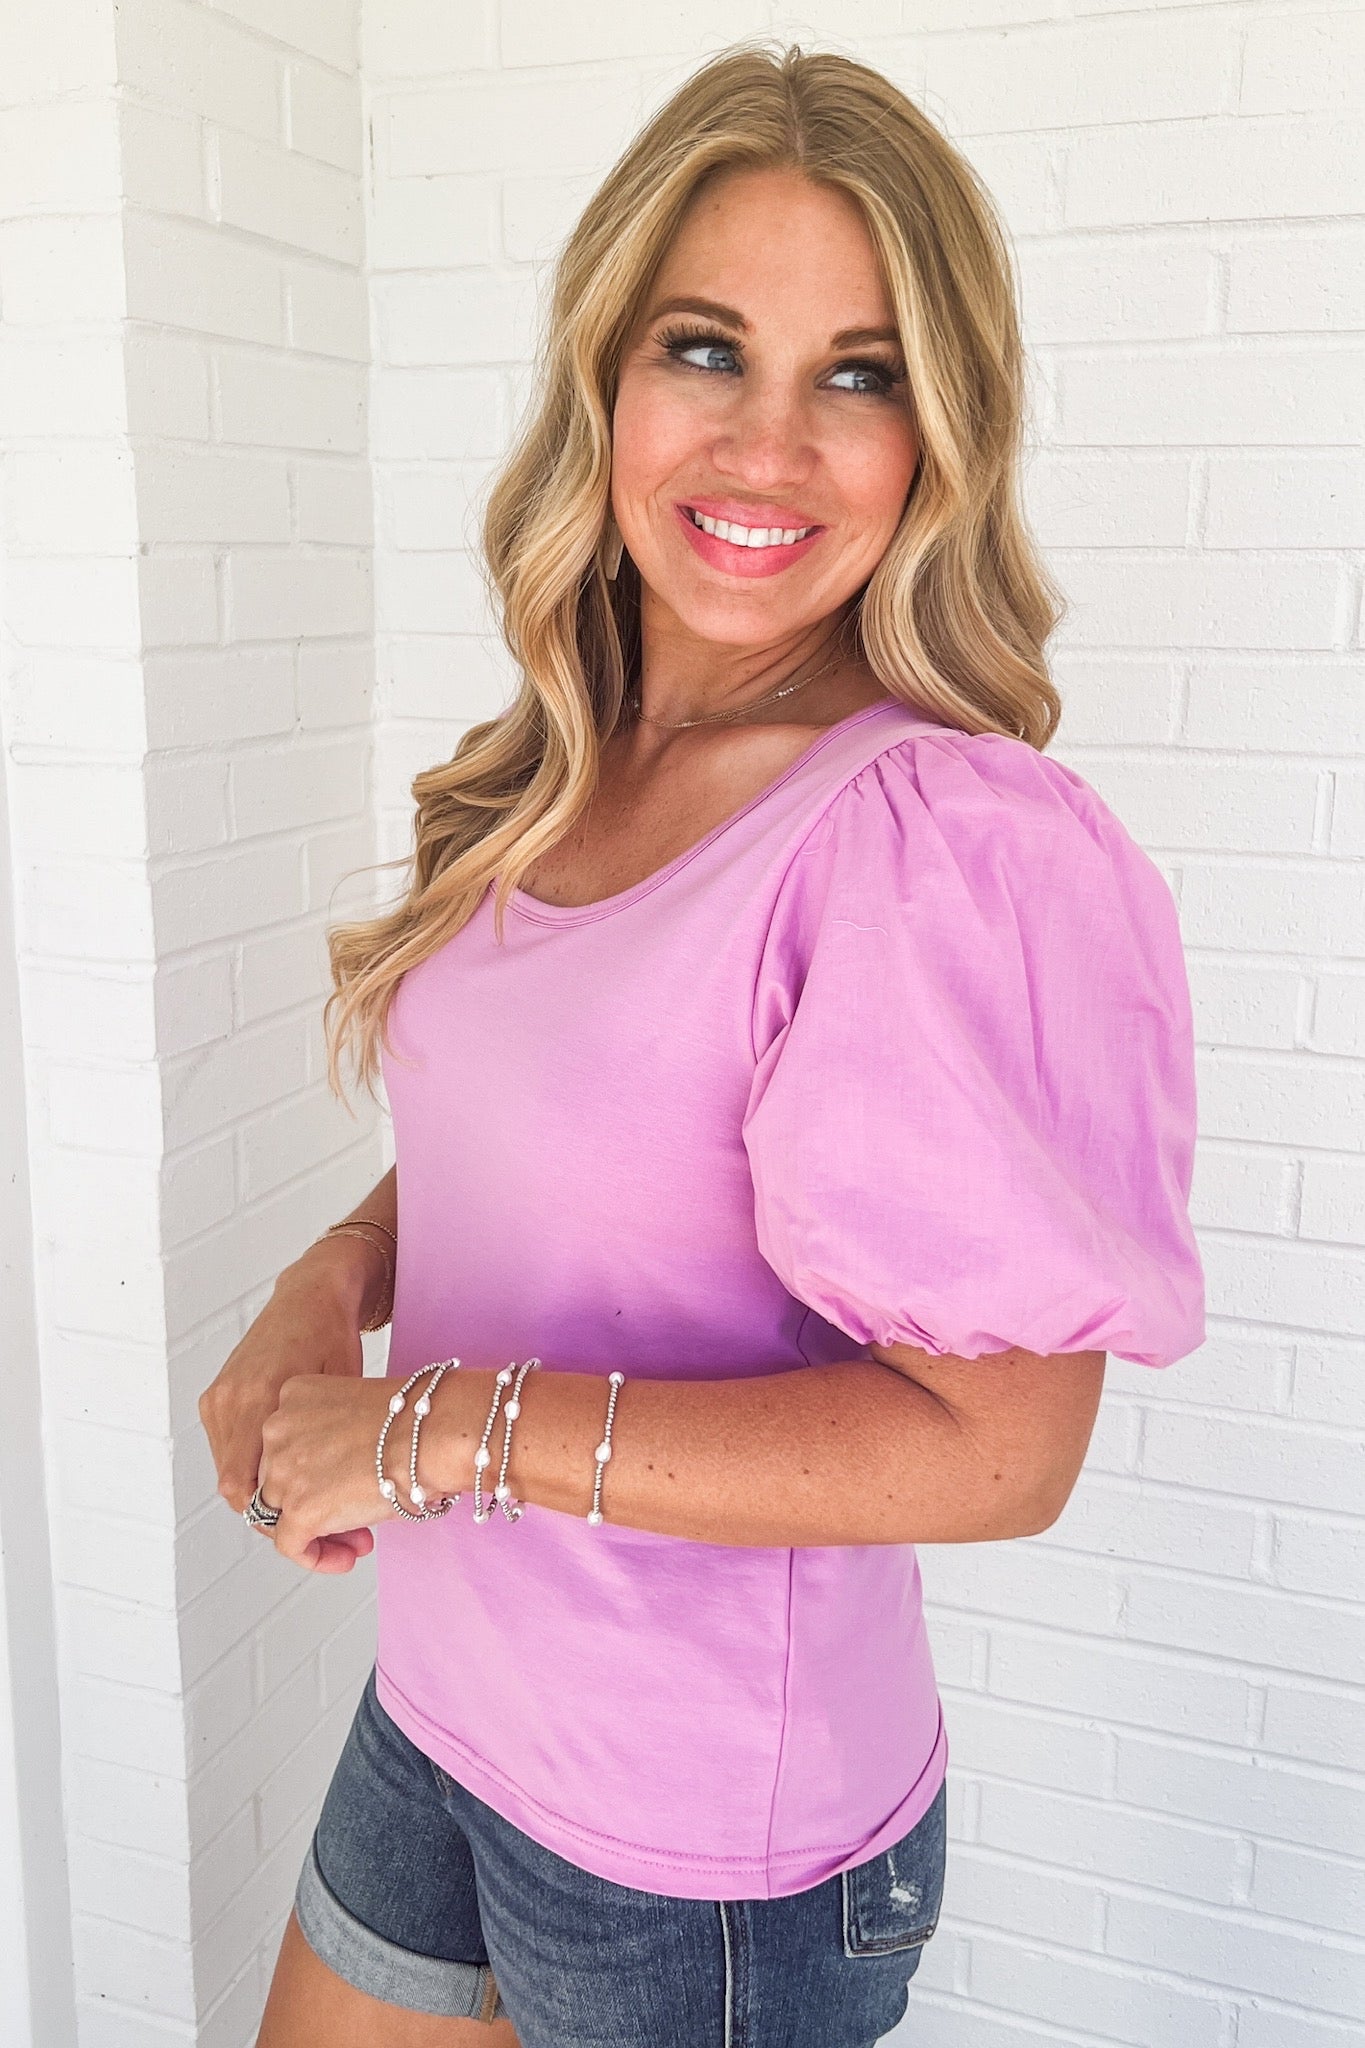 The Shay Top in Lilac by Michelle McDowell